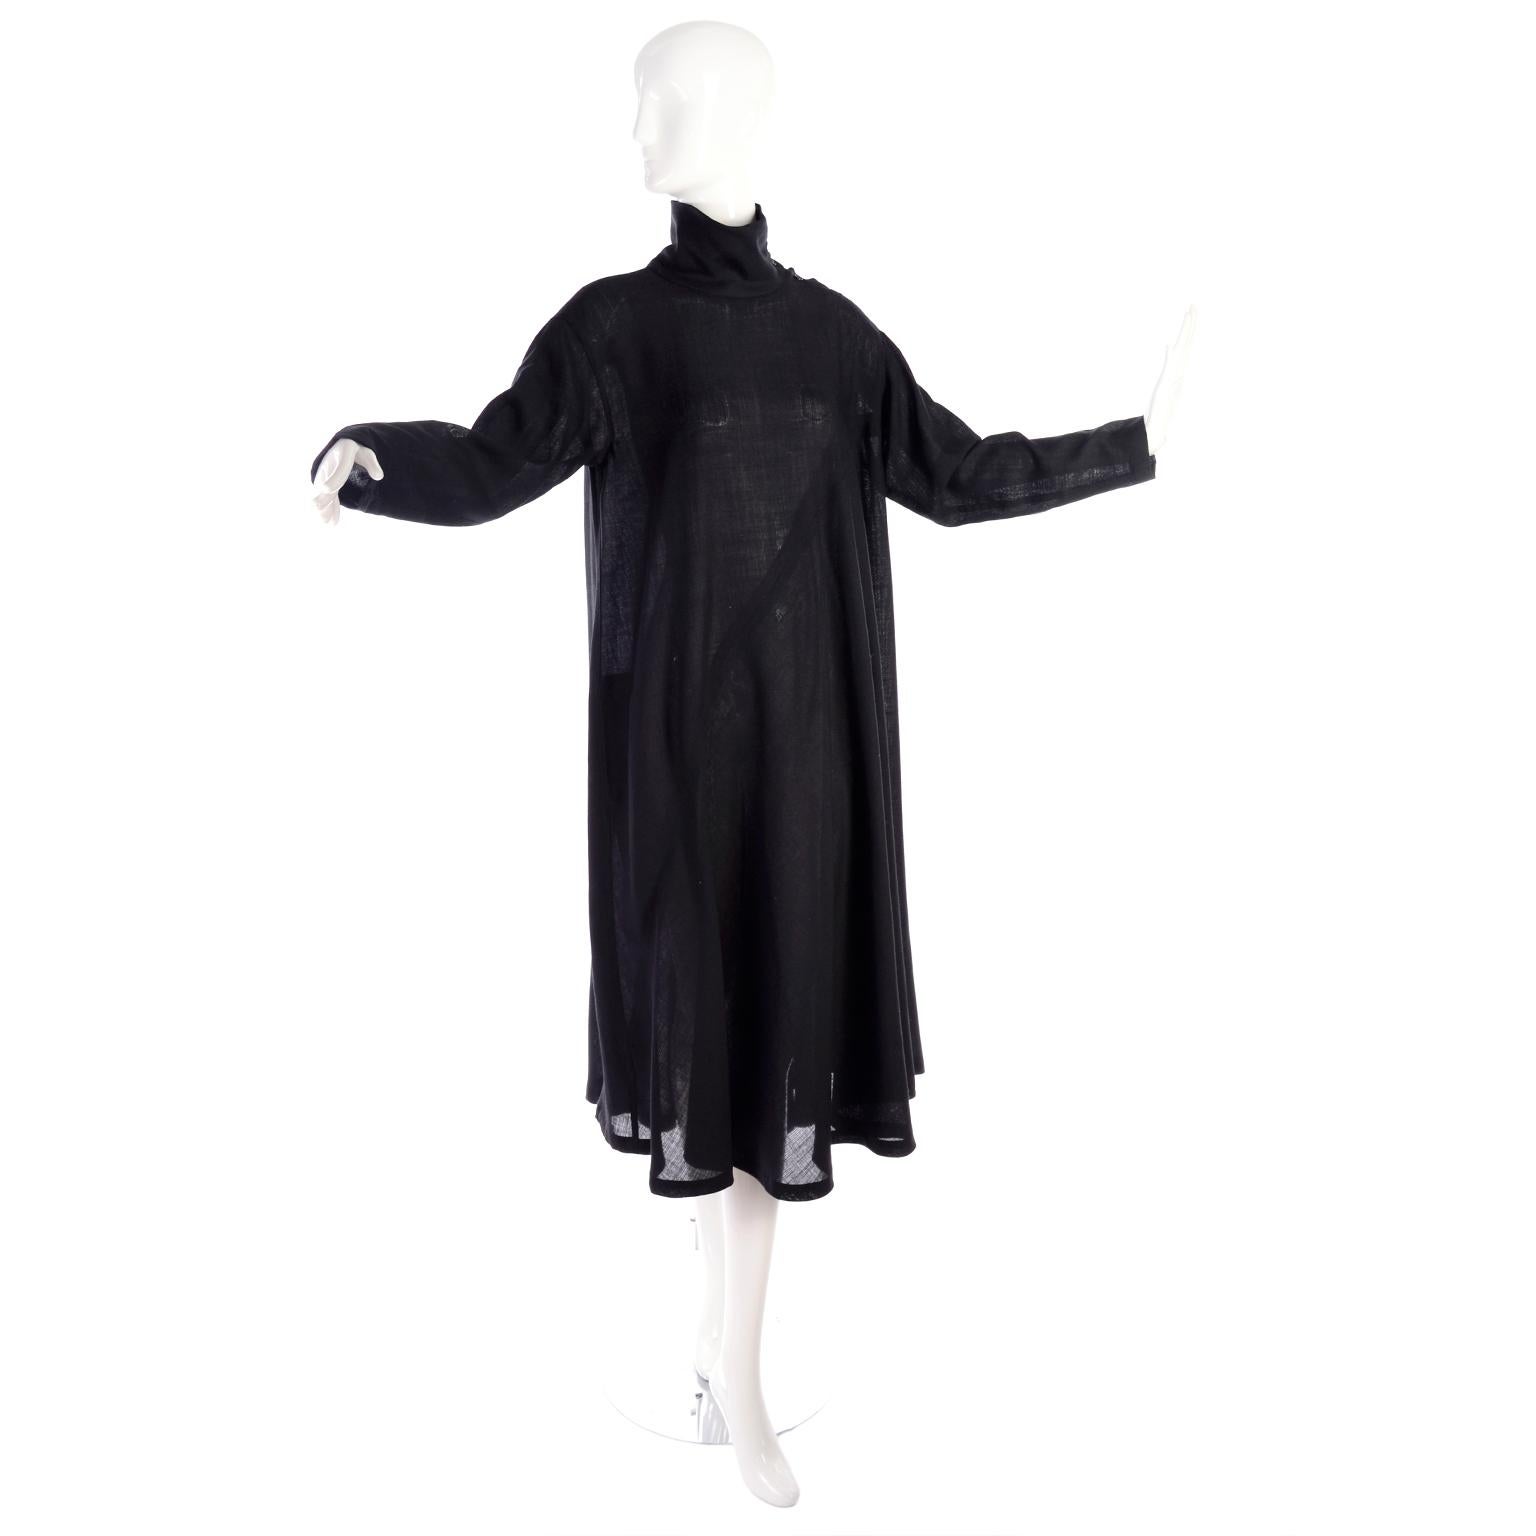 This is a truly iconic vintage 1980's Issey Miyake tent mock turtleneck dress in his signature style in a lightweight black wool crepe. The dress has long sleeves and buttons at the neck. Labeled a size small, the dress has a versatile fit because